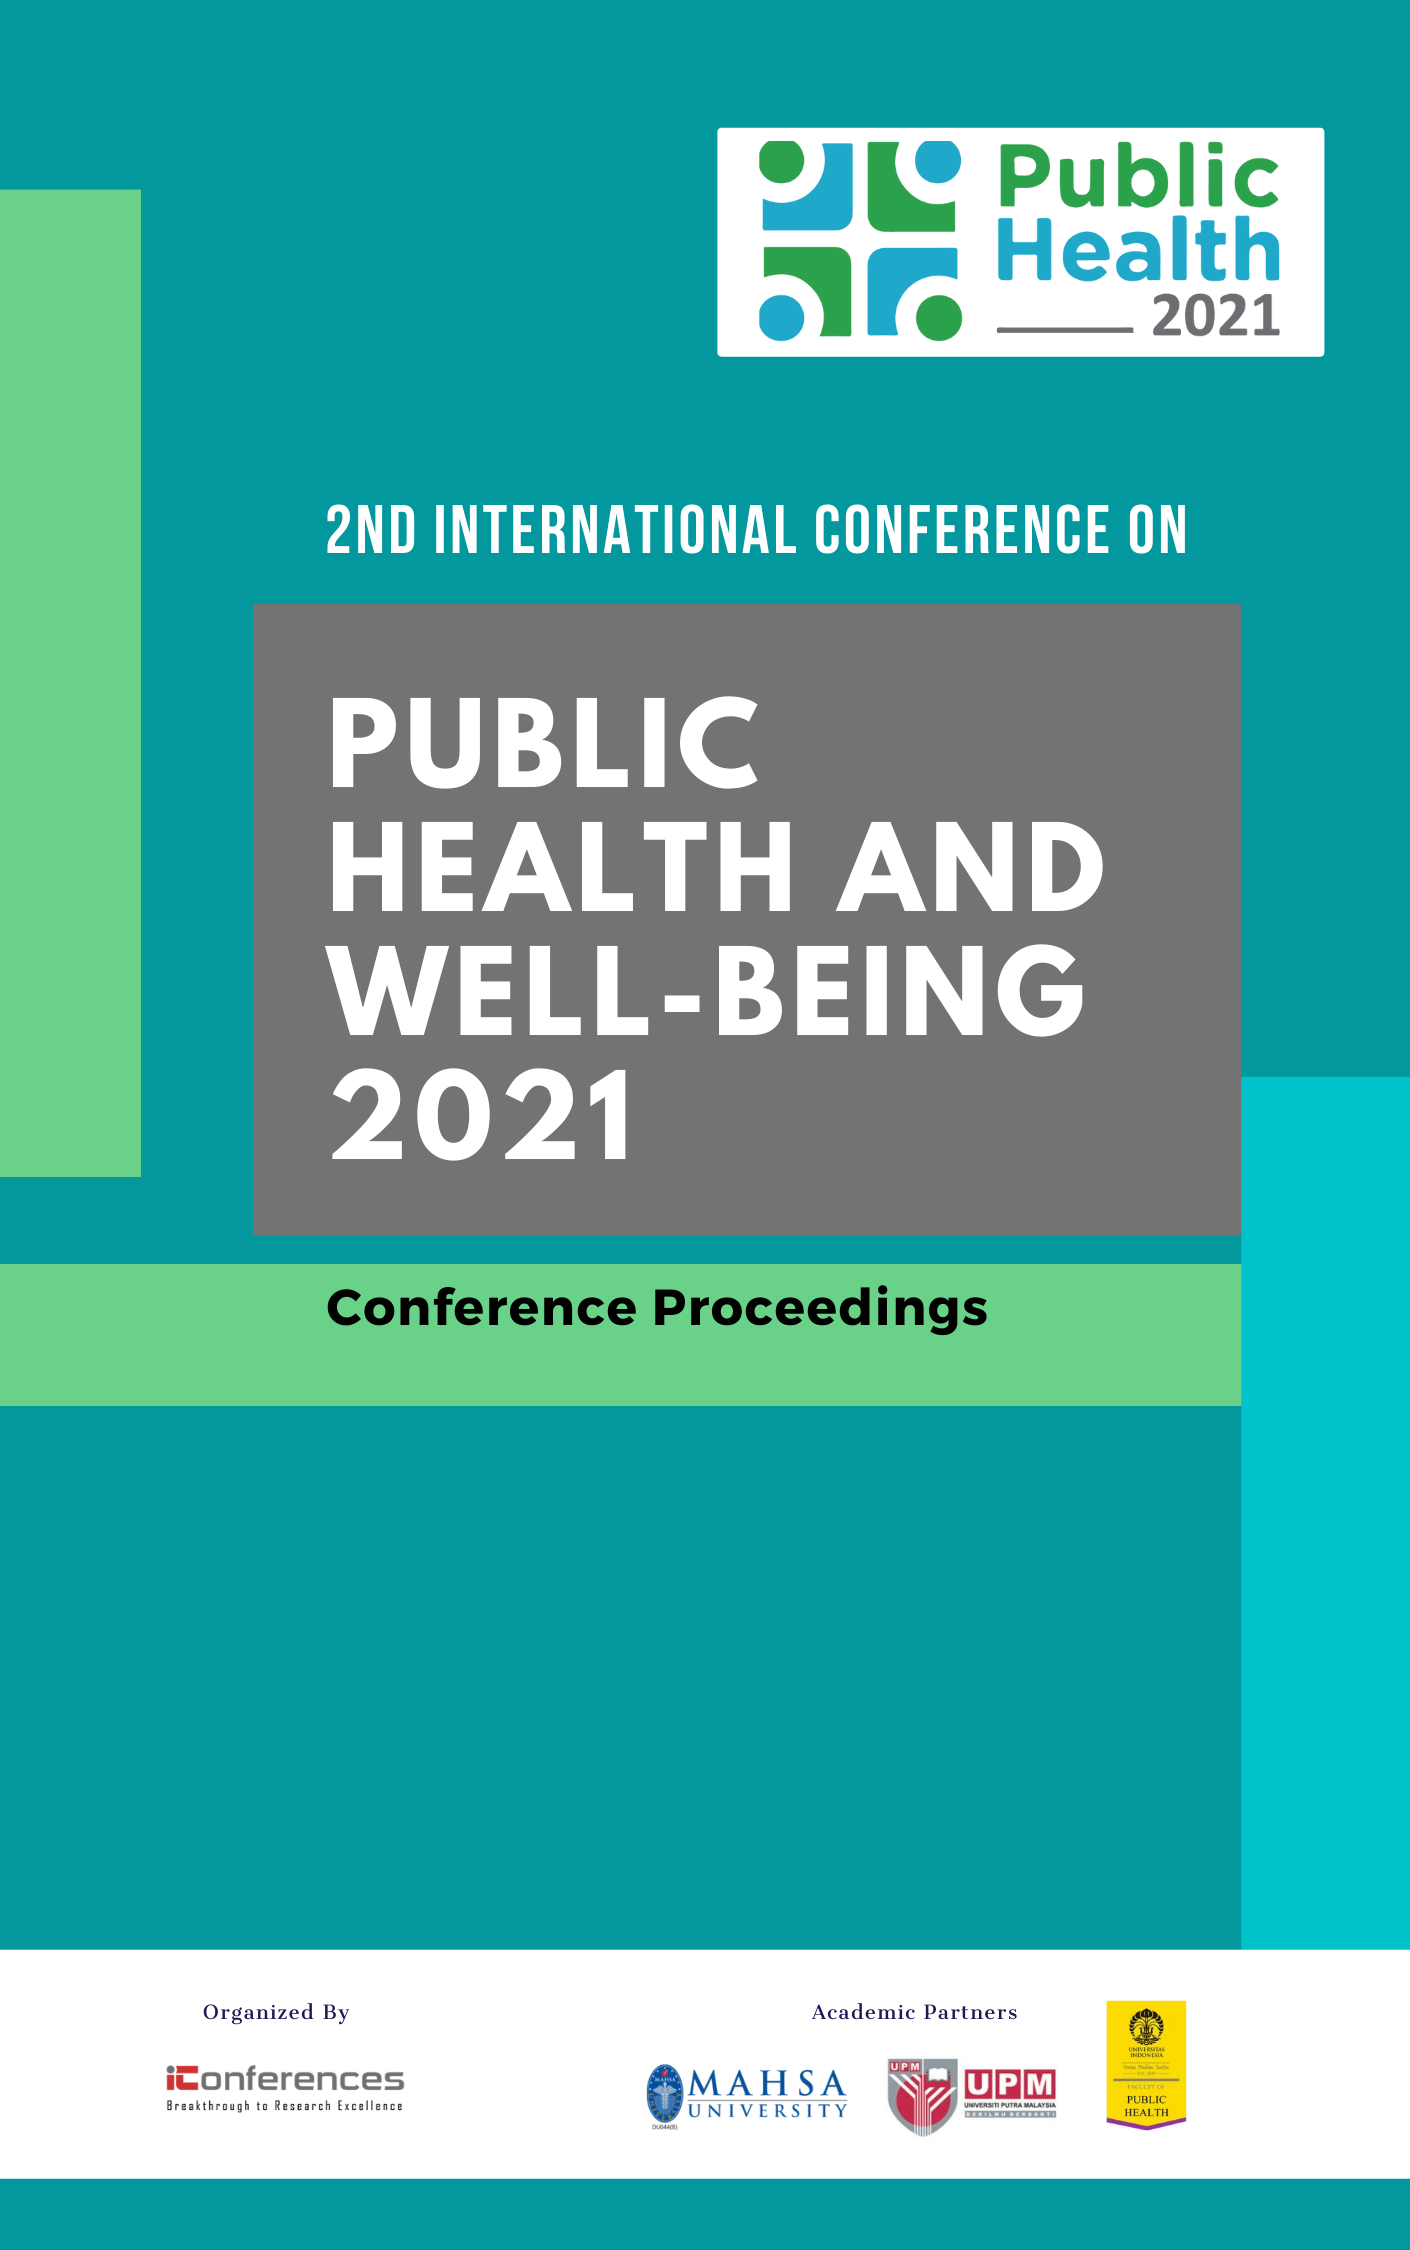 					View Vol. 2 No. 1 (2021): Conference Proceedings of the 2nd International Conference on Public Health and Well-being
				